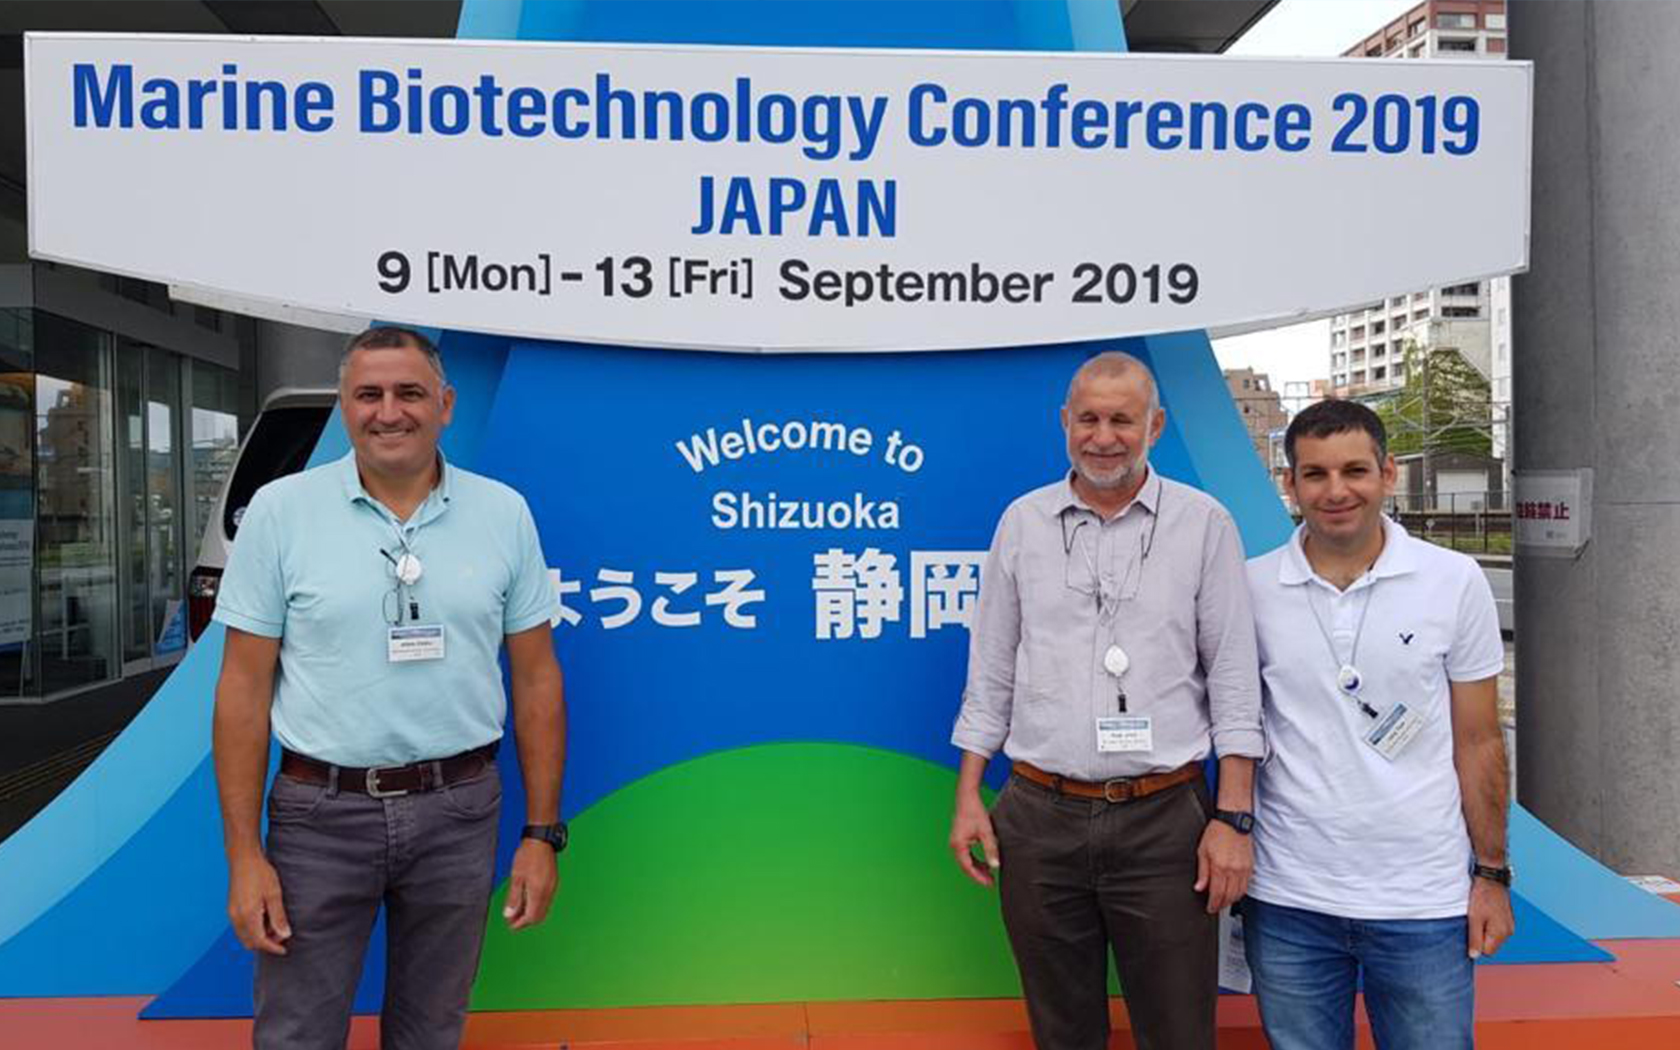 Amir, Eli and Tom attended the International Marine Biotechnology Conference in Shizuoka, Japan